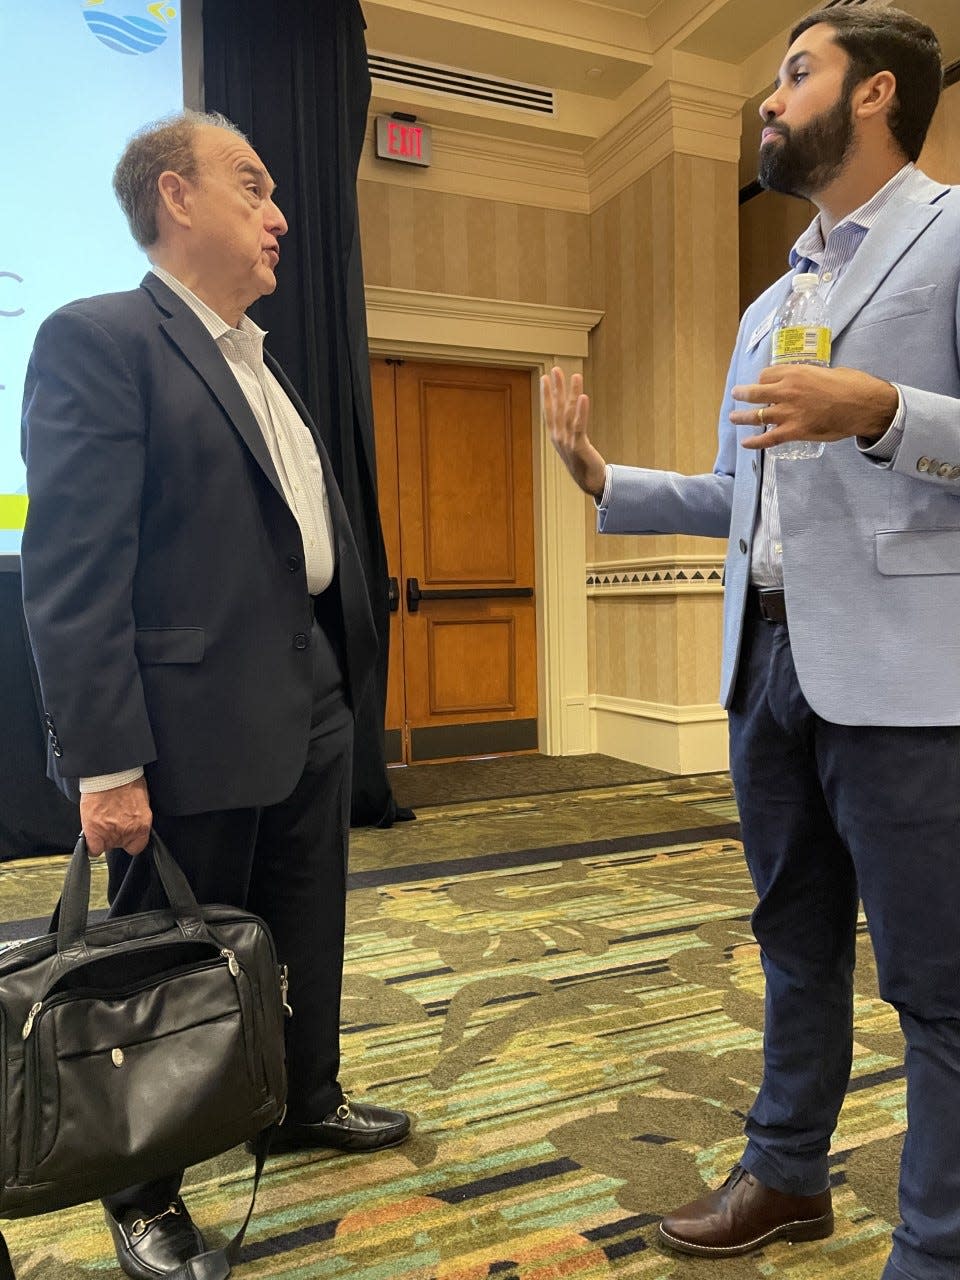 Amir Ferreira Neto (right), director of Florida Gulf Coast University's Regional Economic Research Institute, talks one-on-one after a presentation on the local economy at the Hilton Naples on Aug. 3, 2022.  The event was sponsored by the Greater Naples Chamber of Commerce.